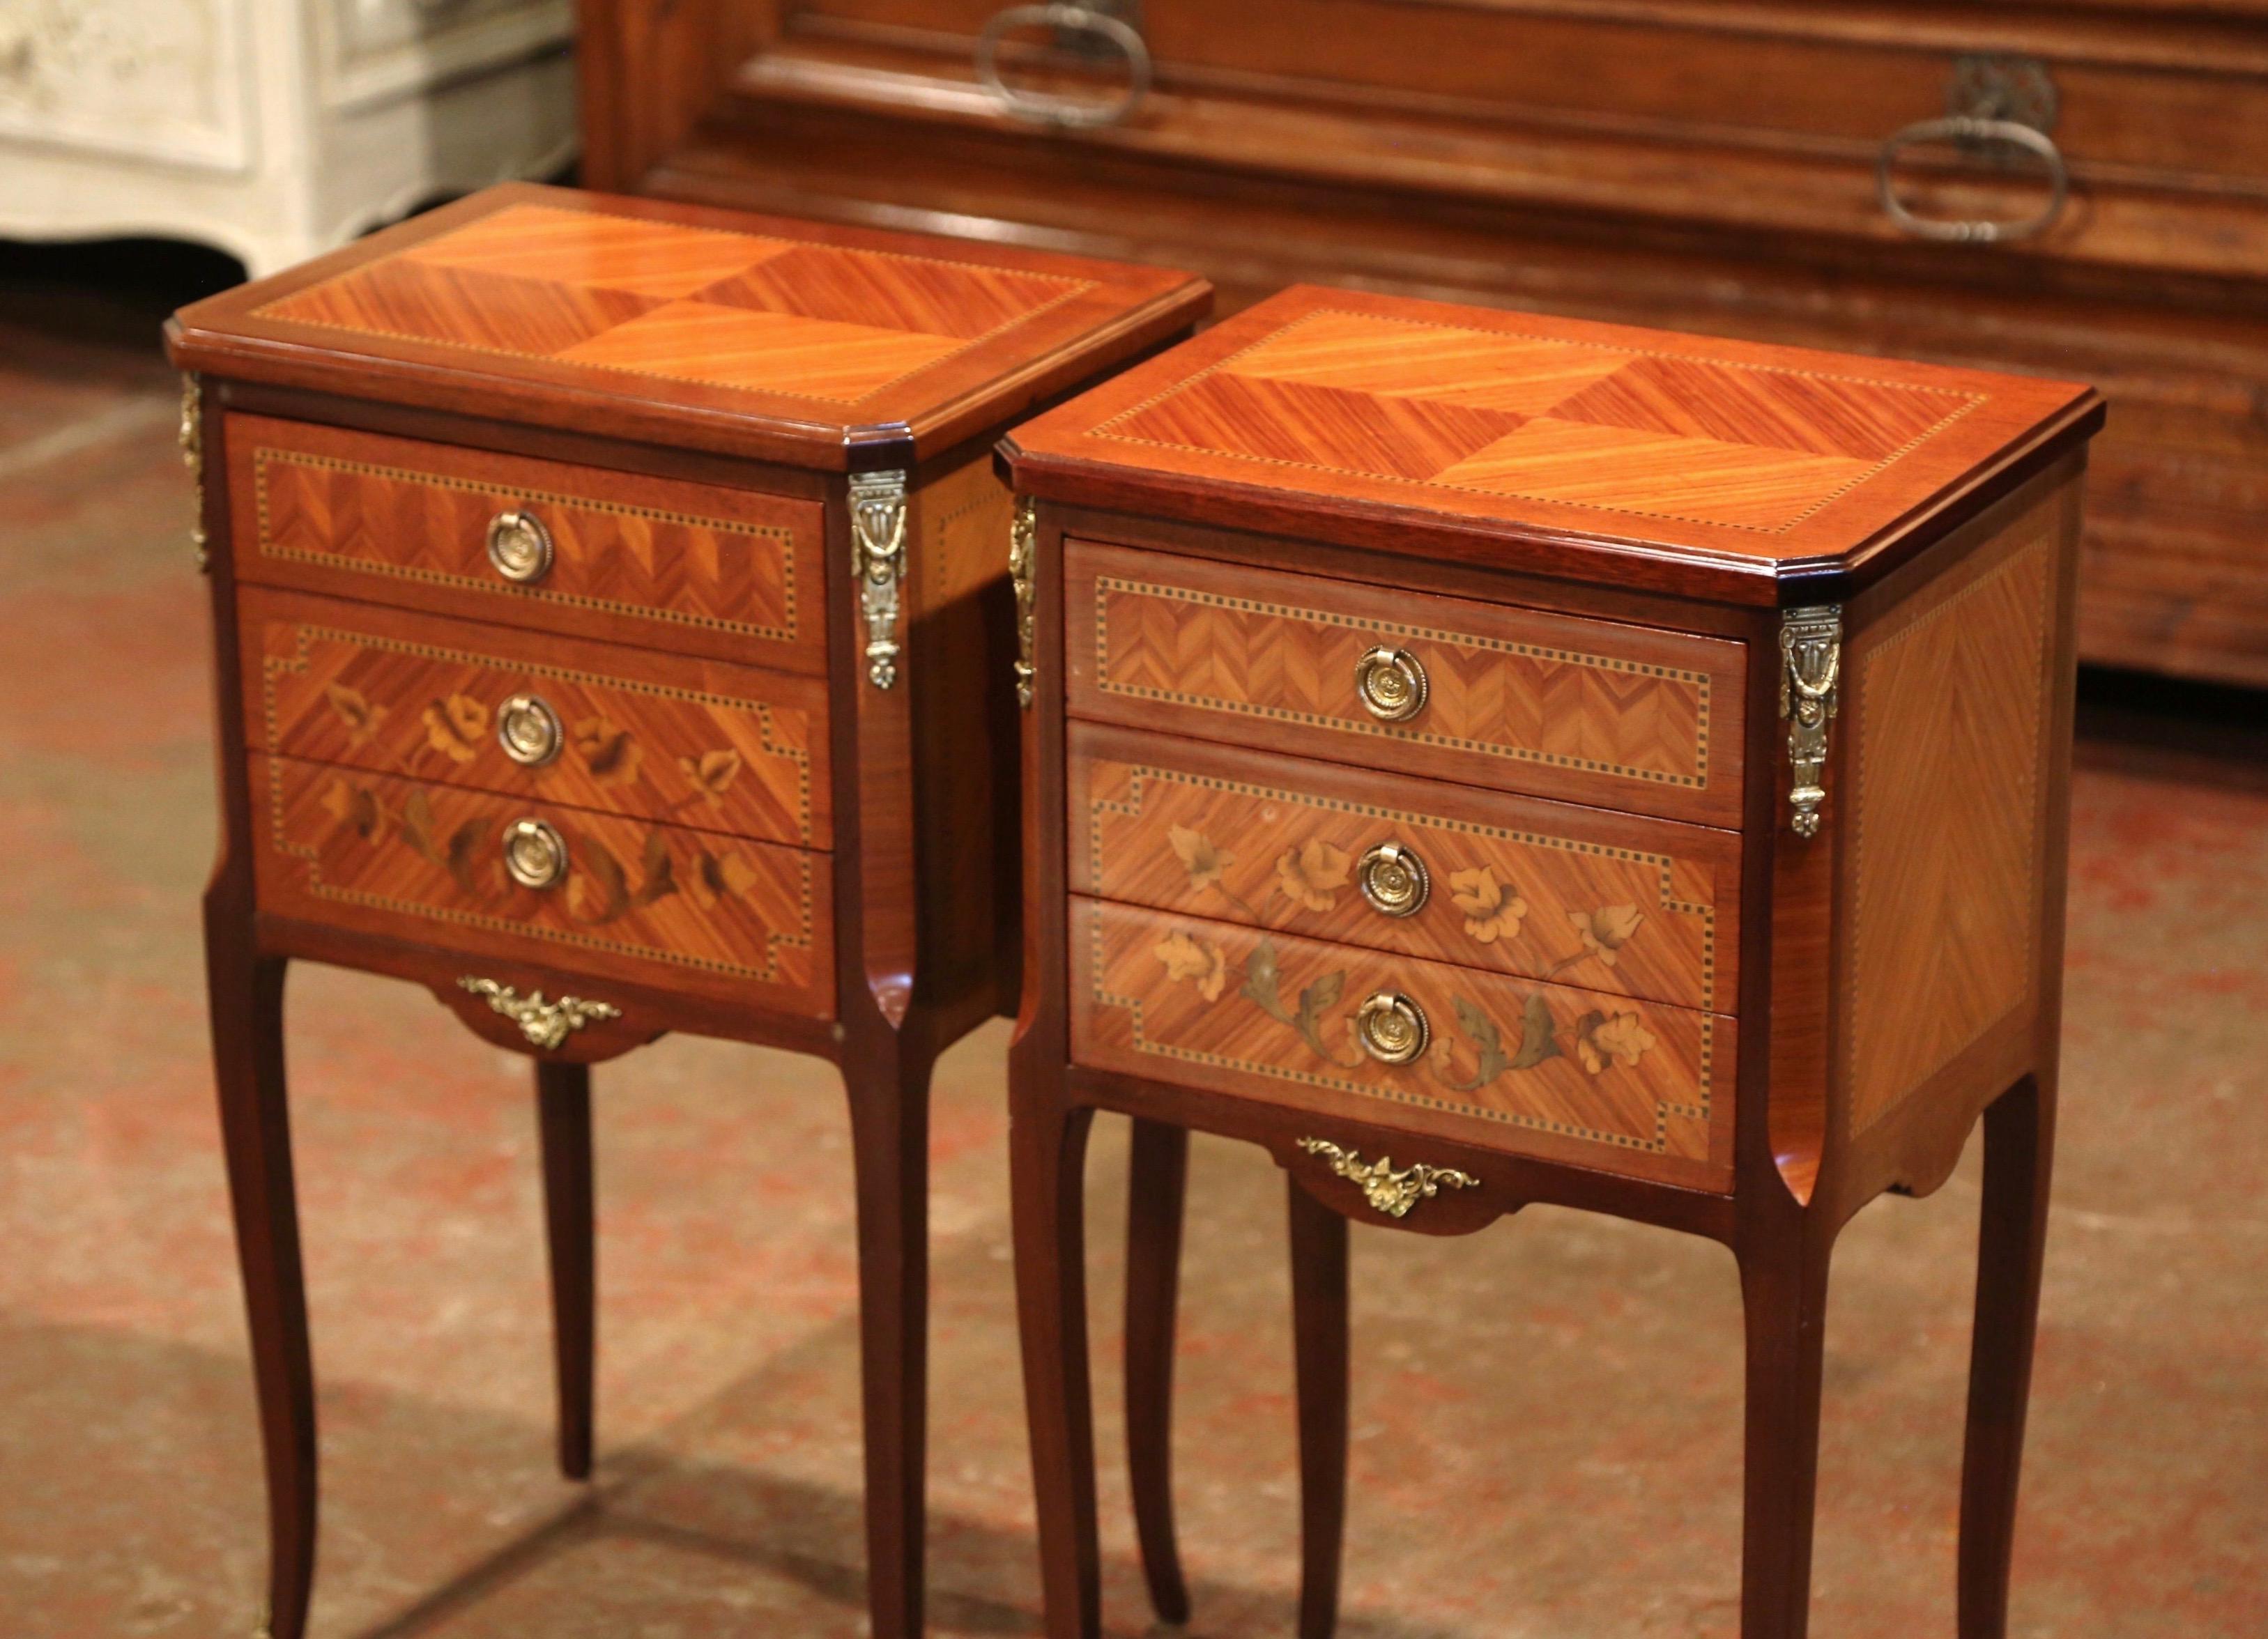 These elegant vintage bedside tables were created in France, circa 1950; each chest stands on cabriole legs with front sabots over a scalloped apron dressed with a bronze mount. The cabinet features three drawers decorated with floral marquetry